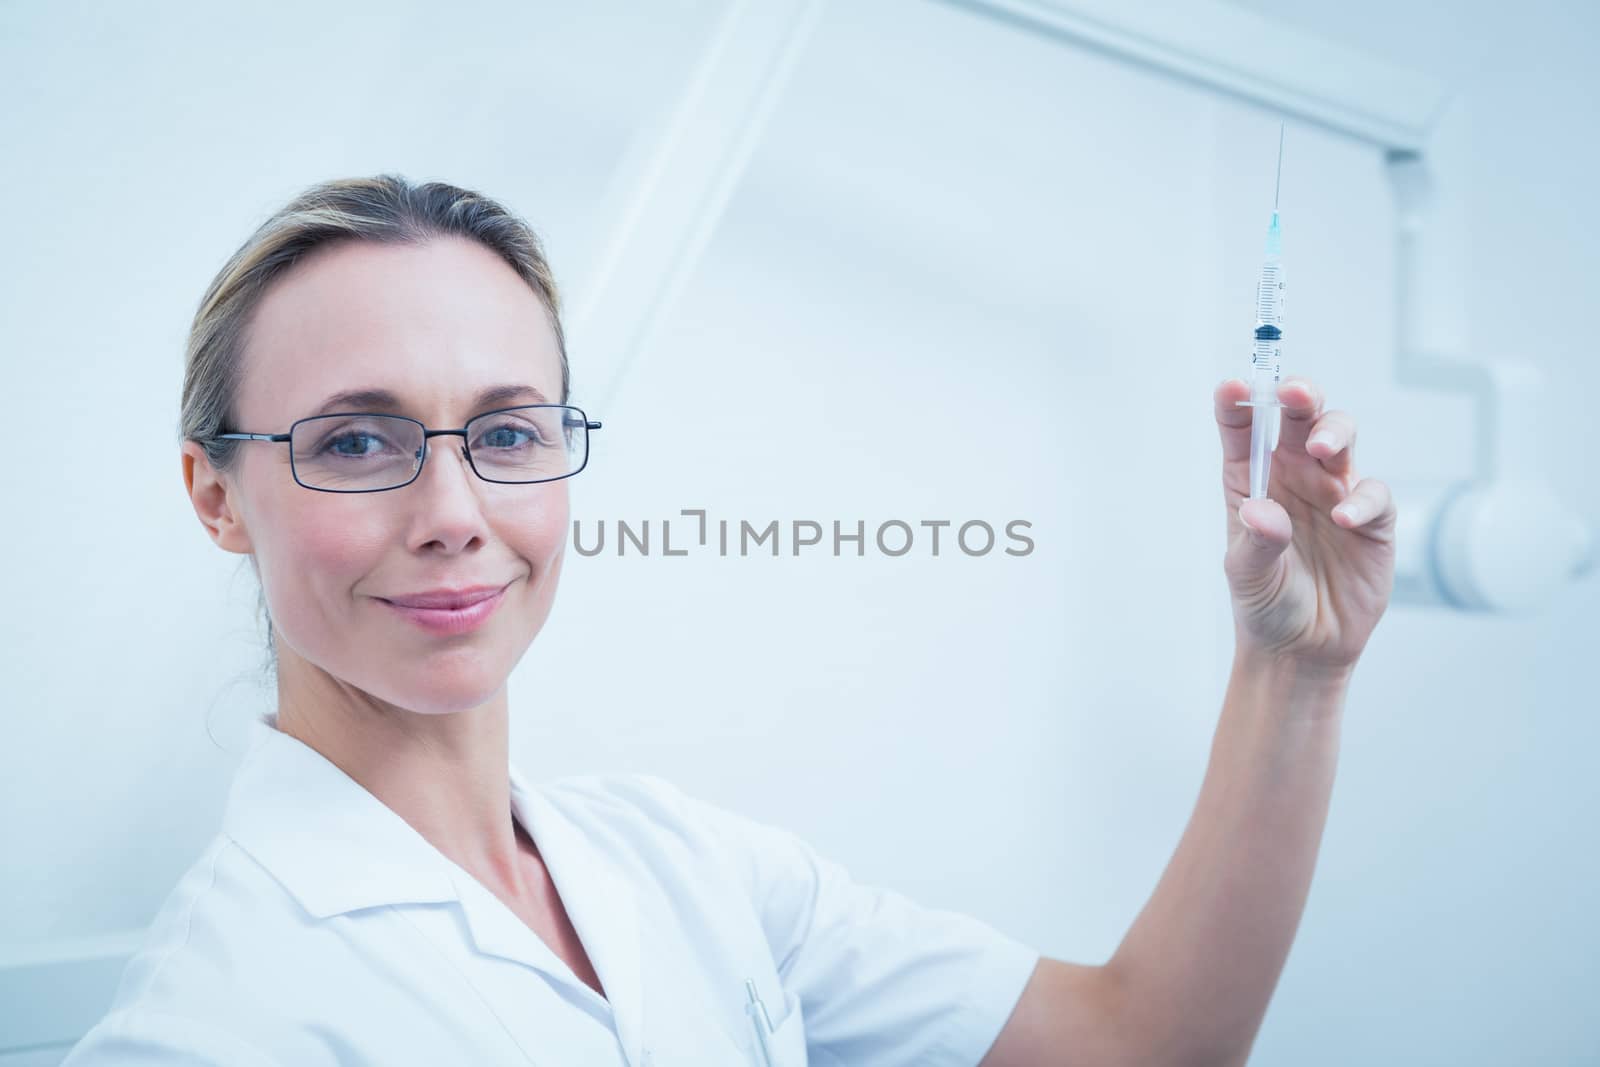 Portrait of smiling young female dentist holding injection